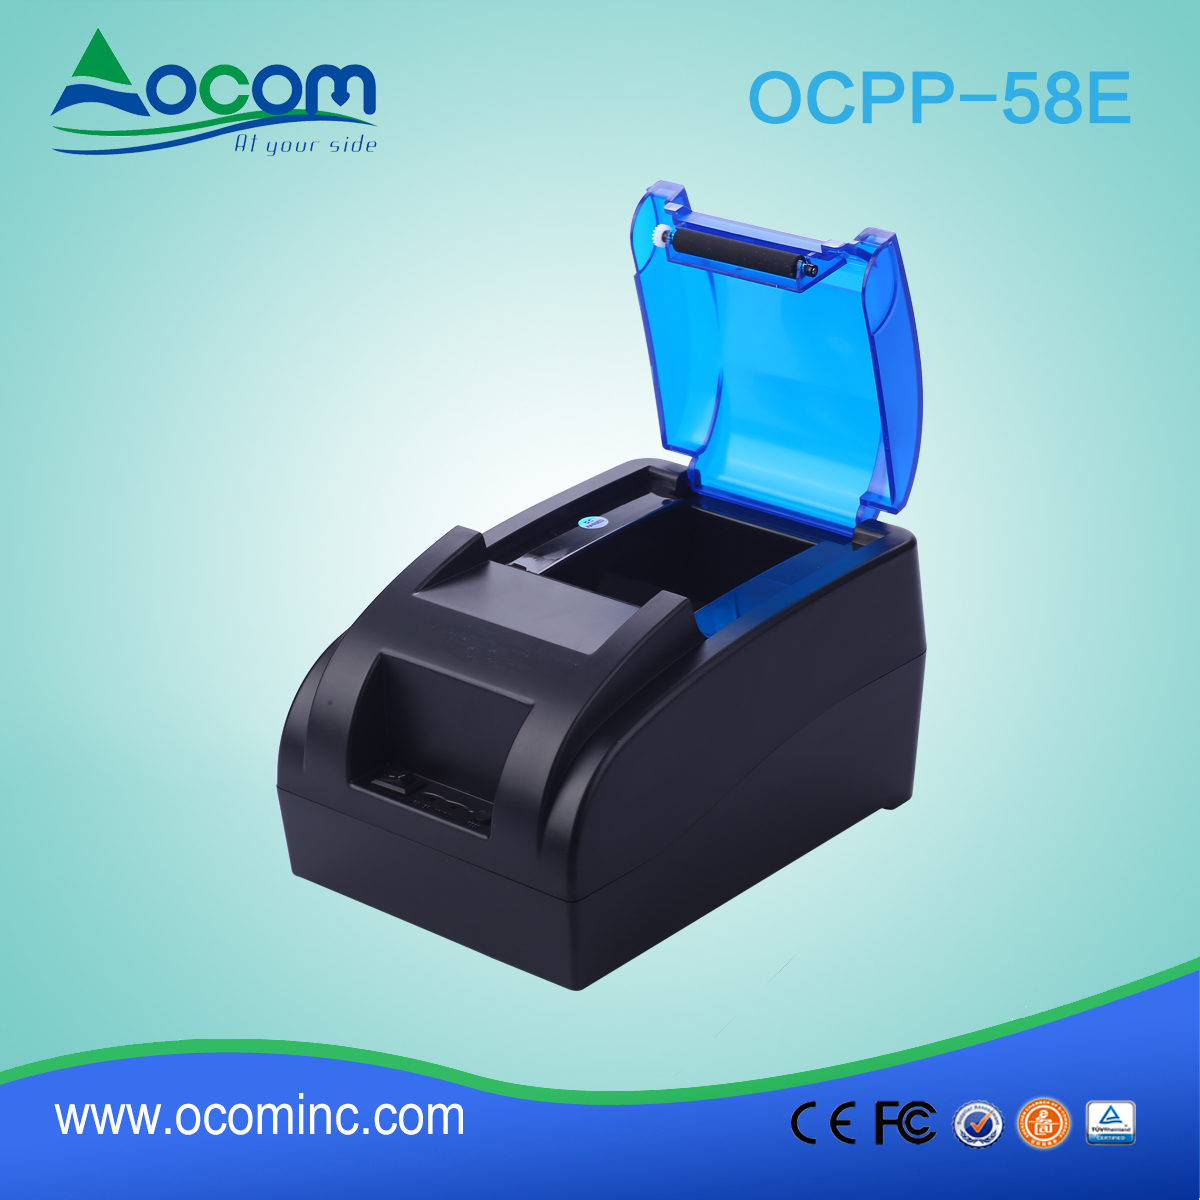 58mm thermal receipt printer with built-in power adaptor ocpp-58E-W WIFI Port